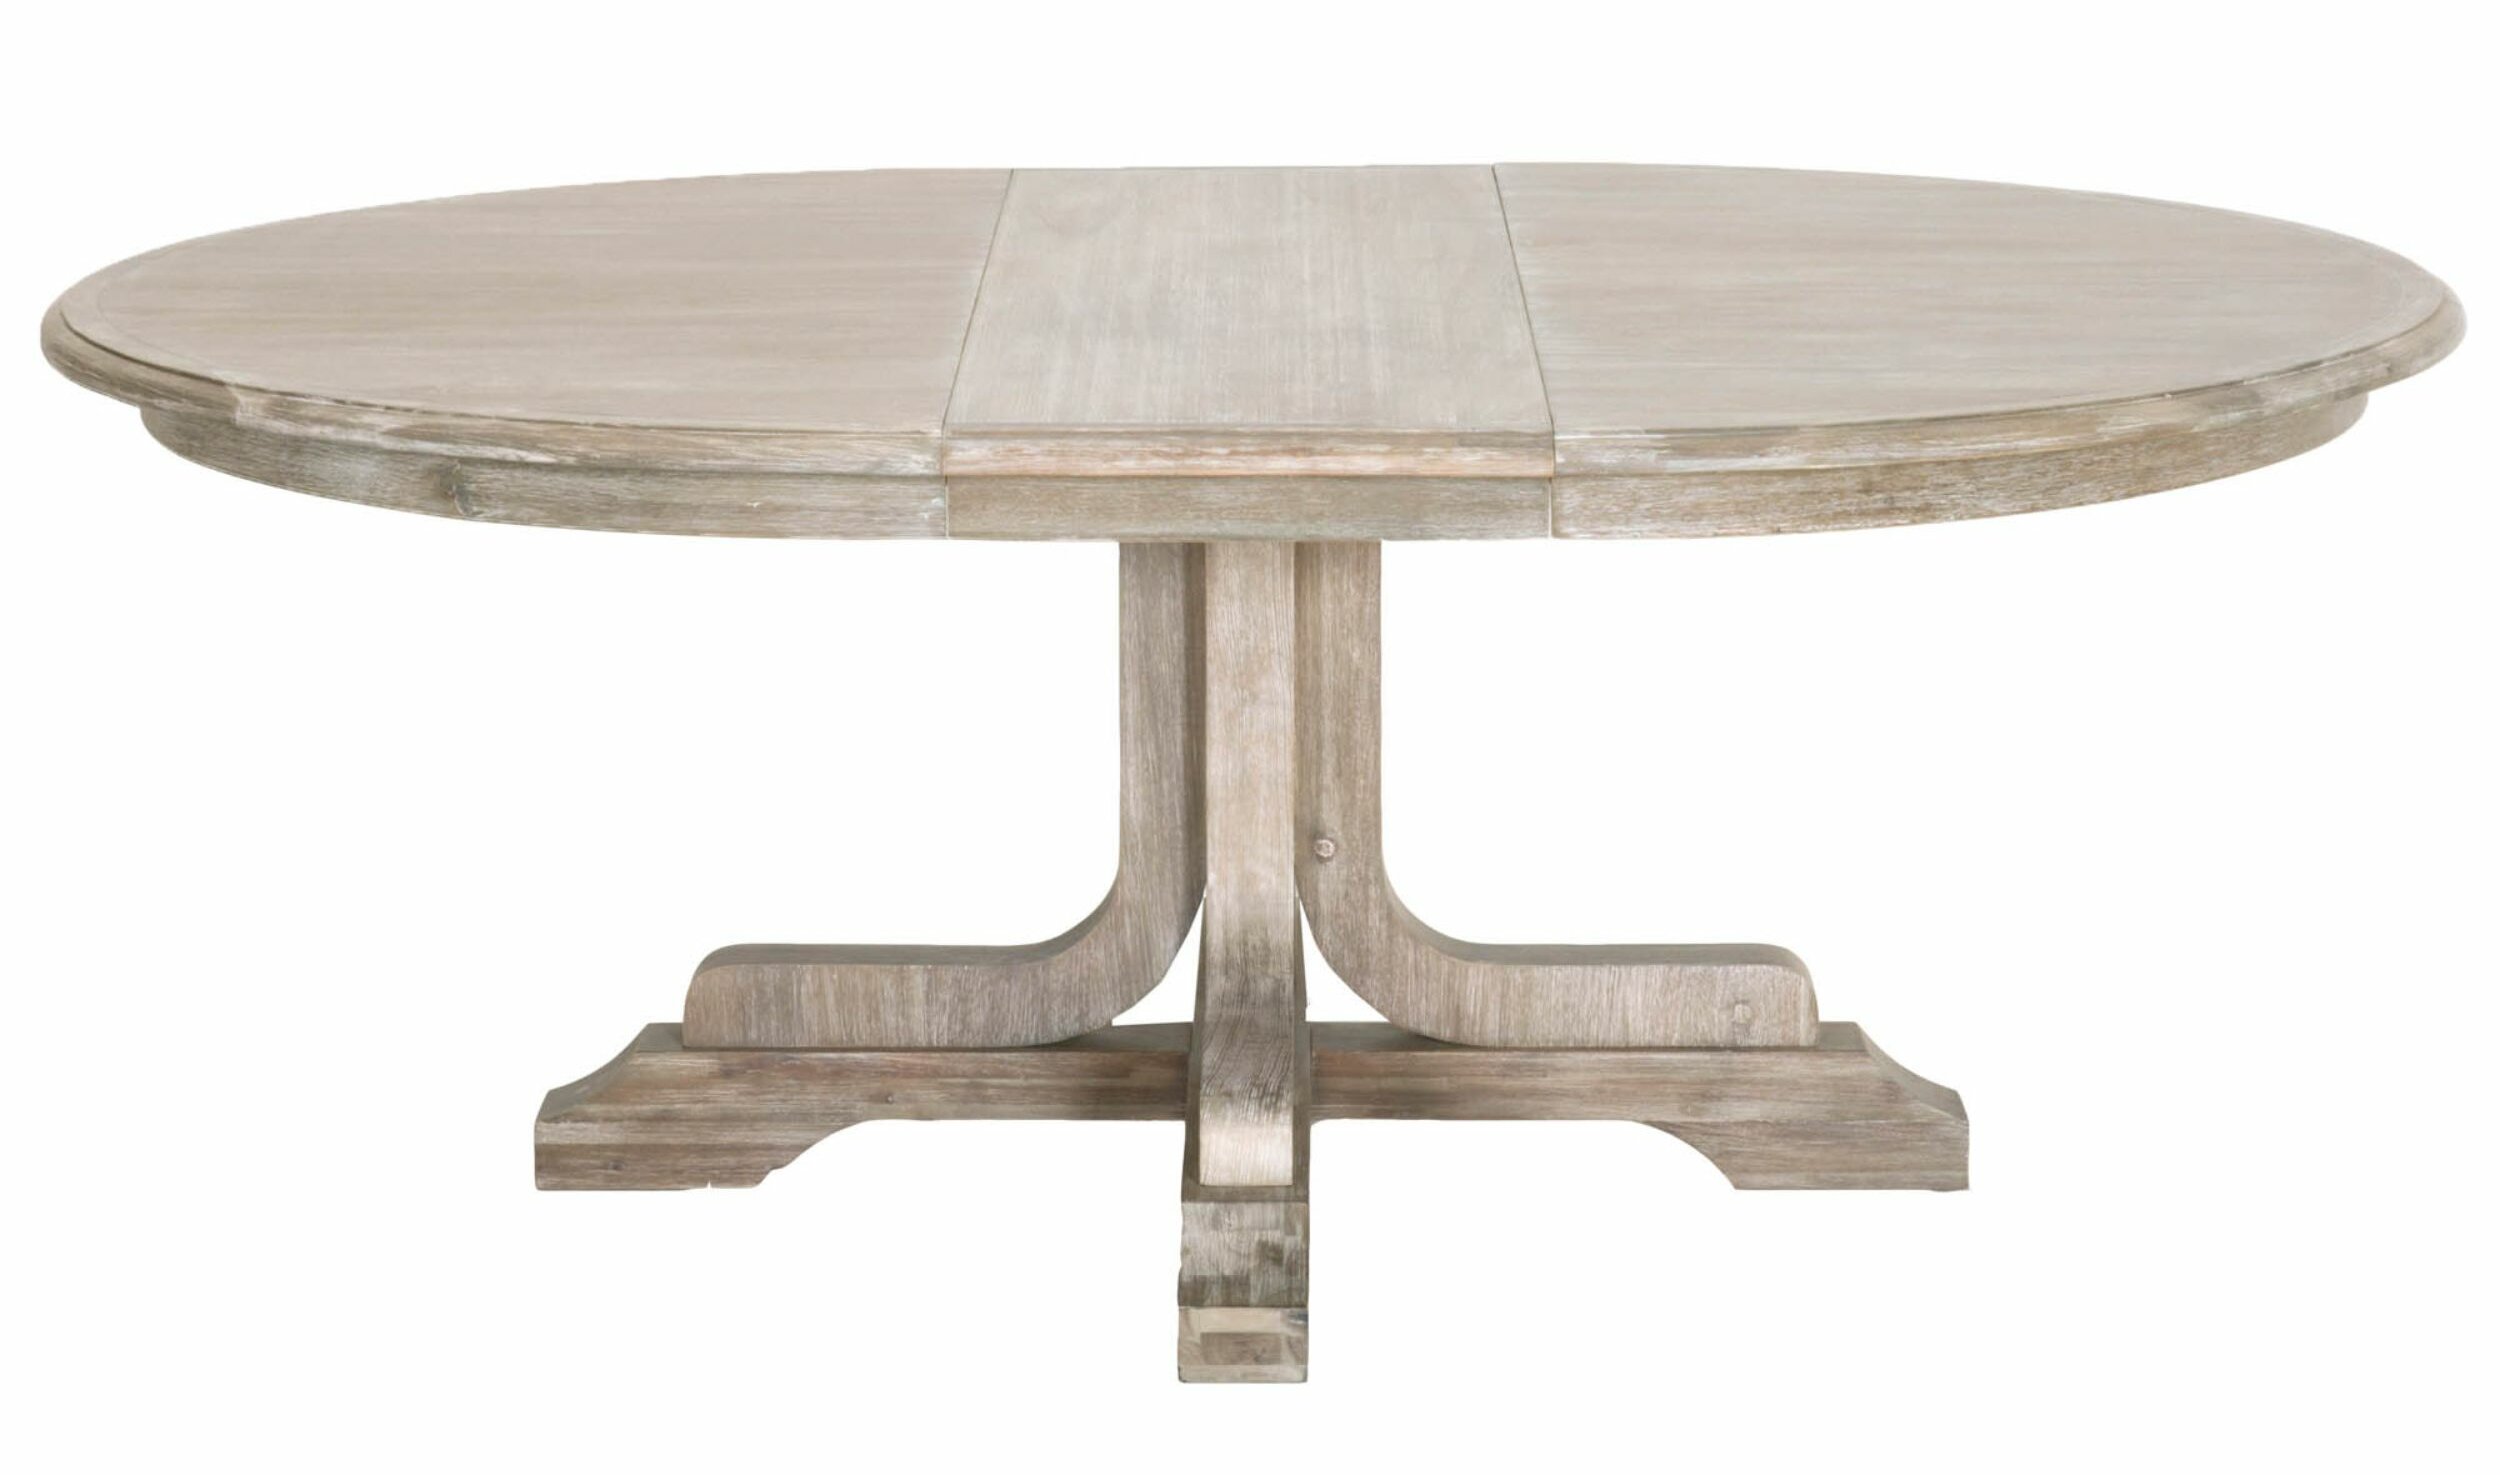 Dining Table With Leaf Extension / Extension Leaf For C28 Dining Table